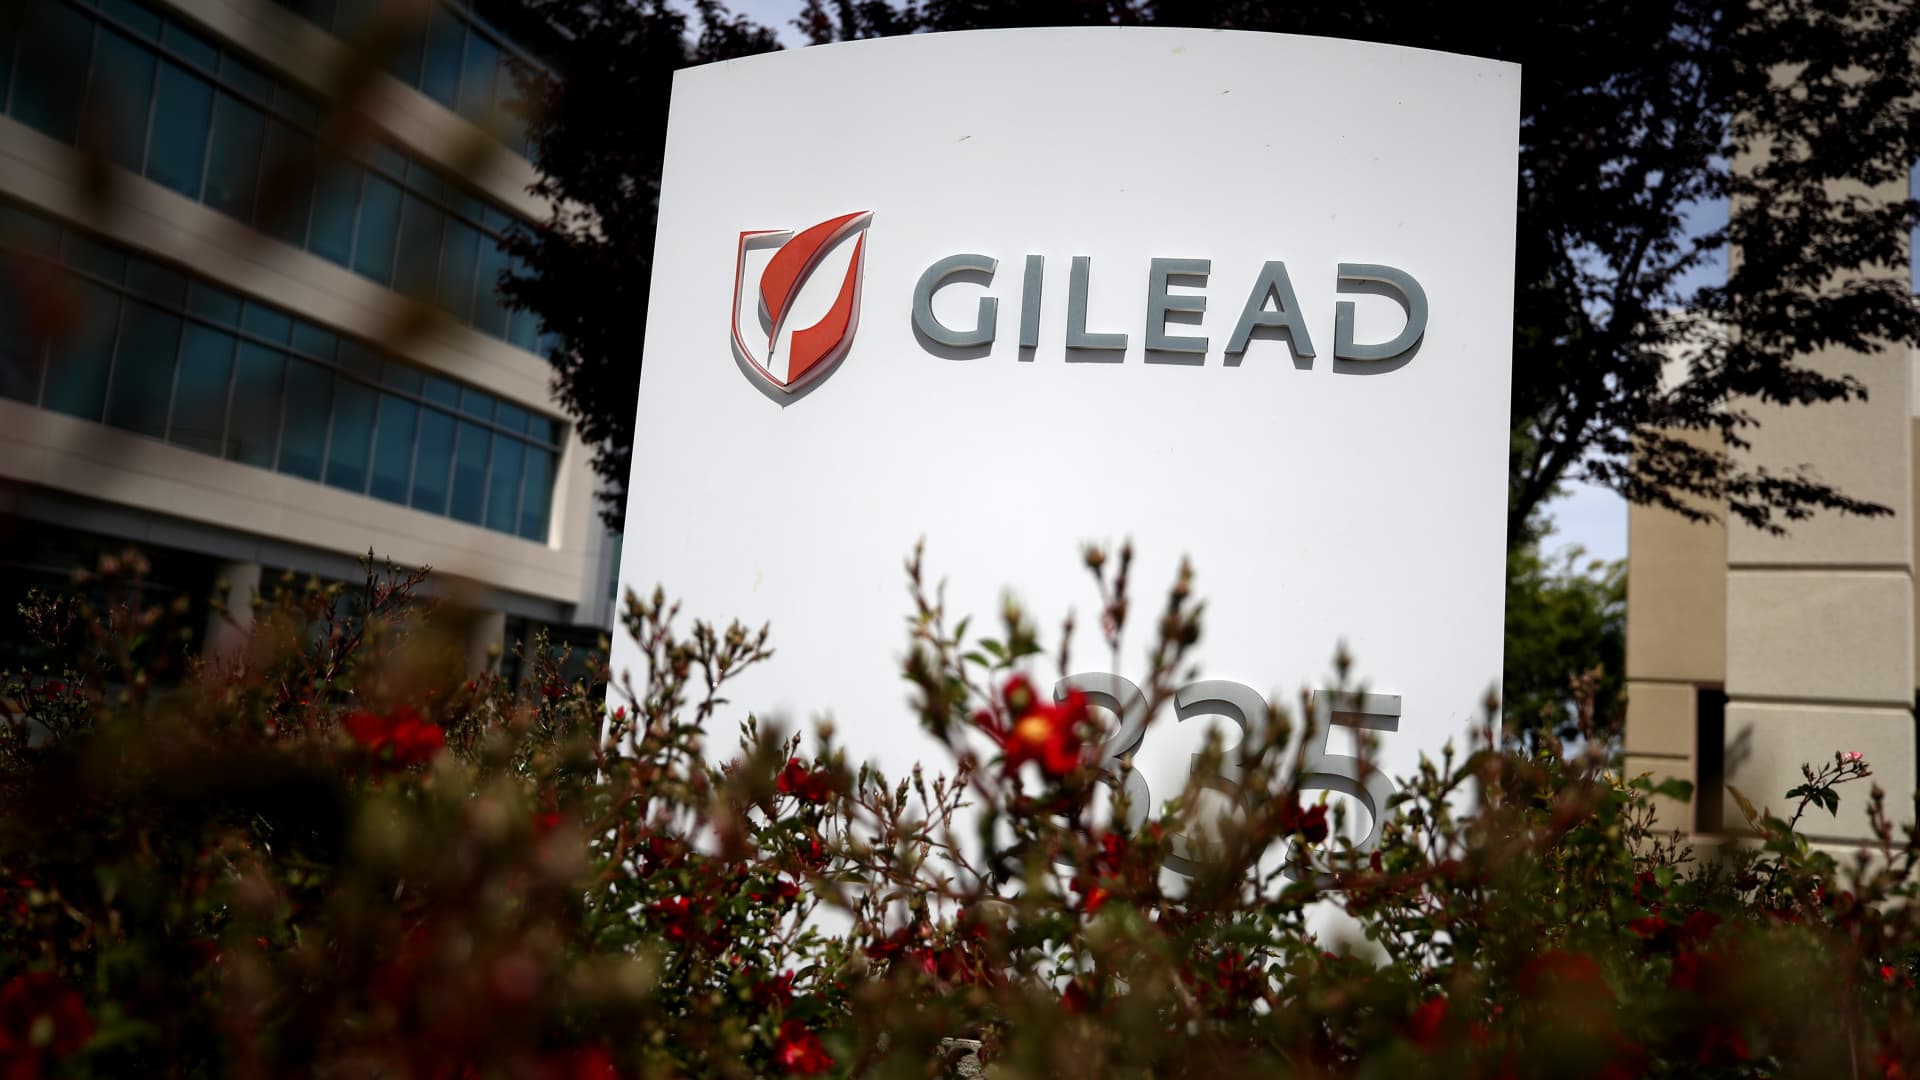 Stocks making the biggest moves midday: Gilead Sciences, Moderna, Tesla and more